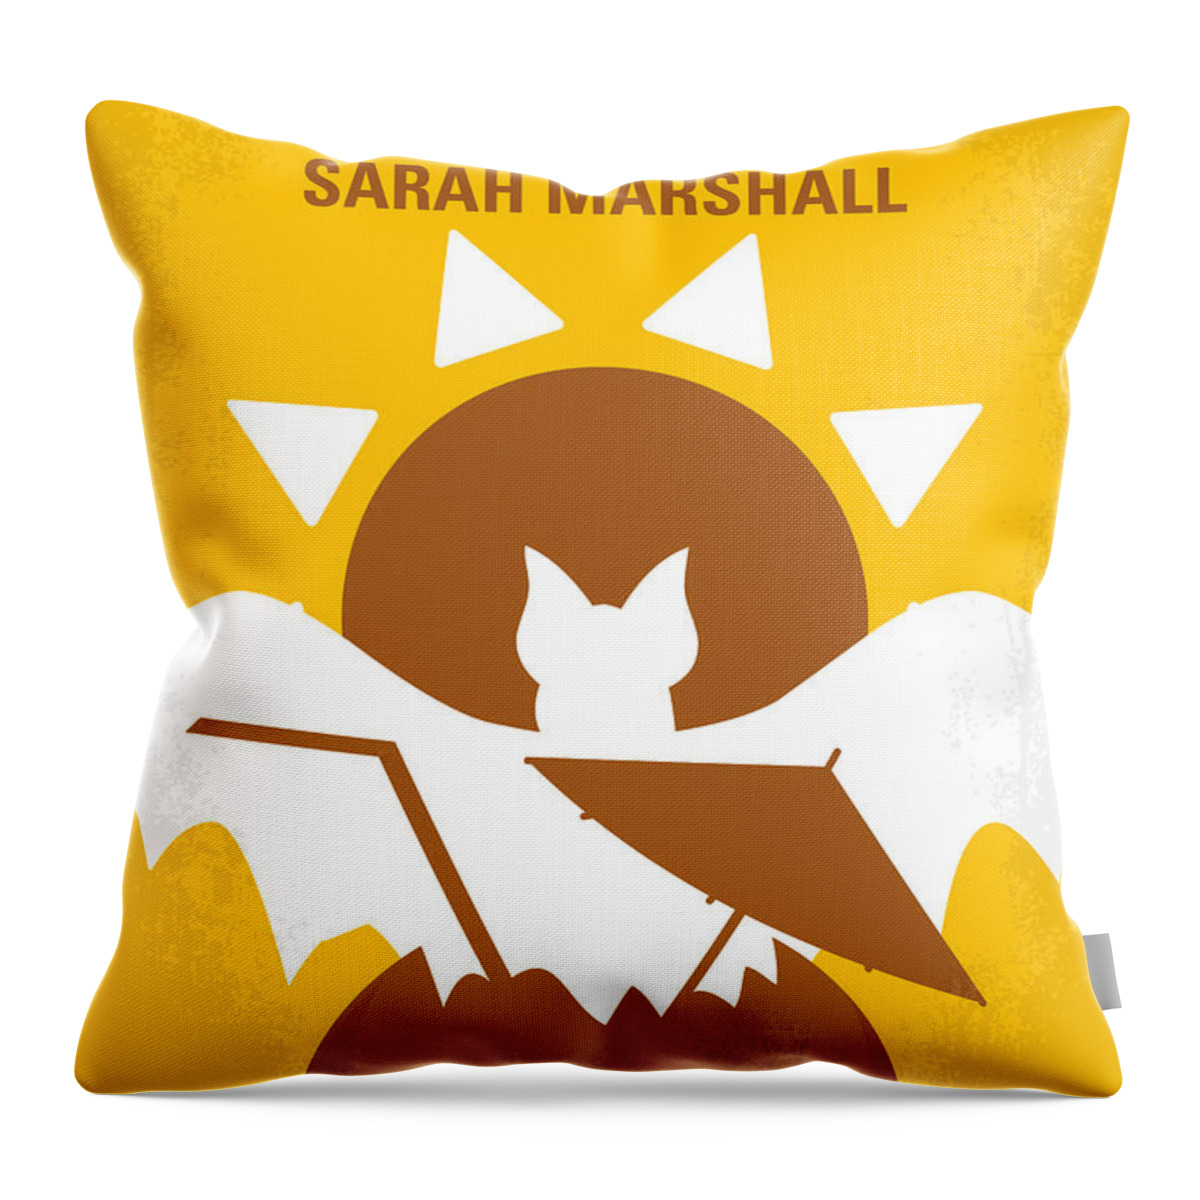 Forgetting Throw Pillow featuring the digital art No393 My Forgetting Sarah Marshall minimal movie poster by Chungkong Art